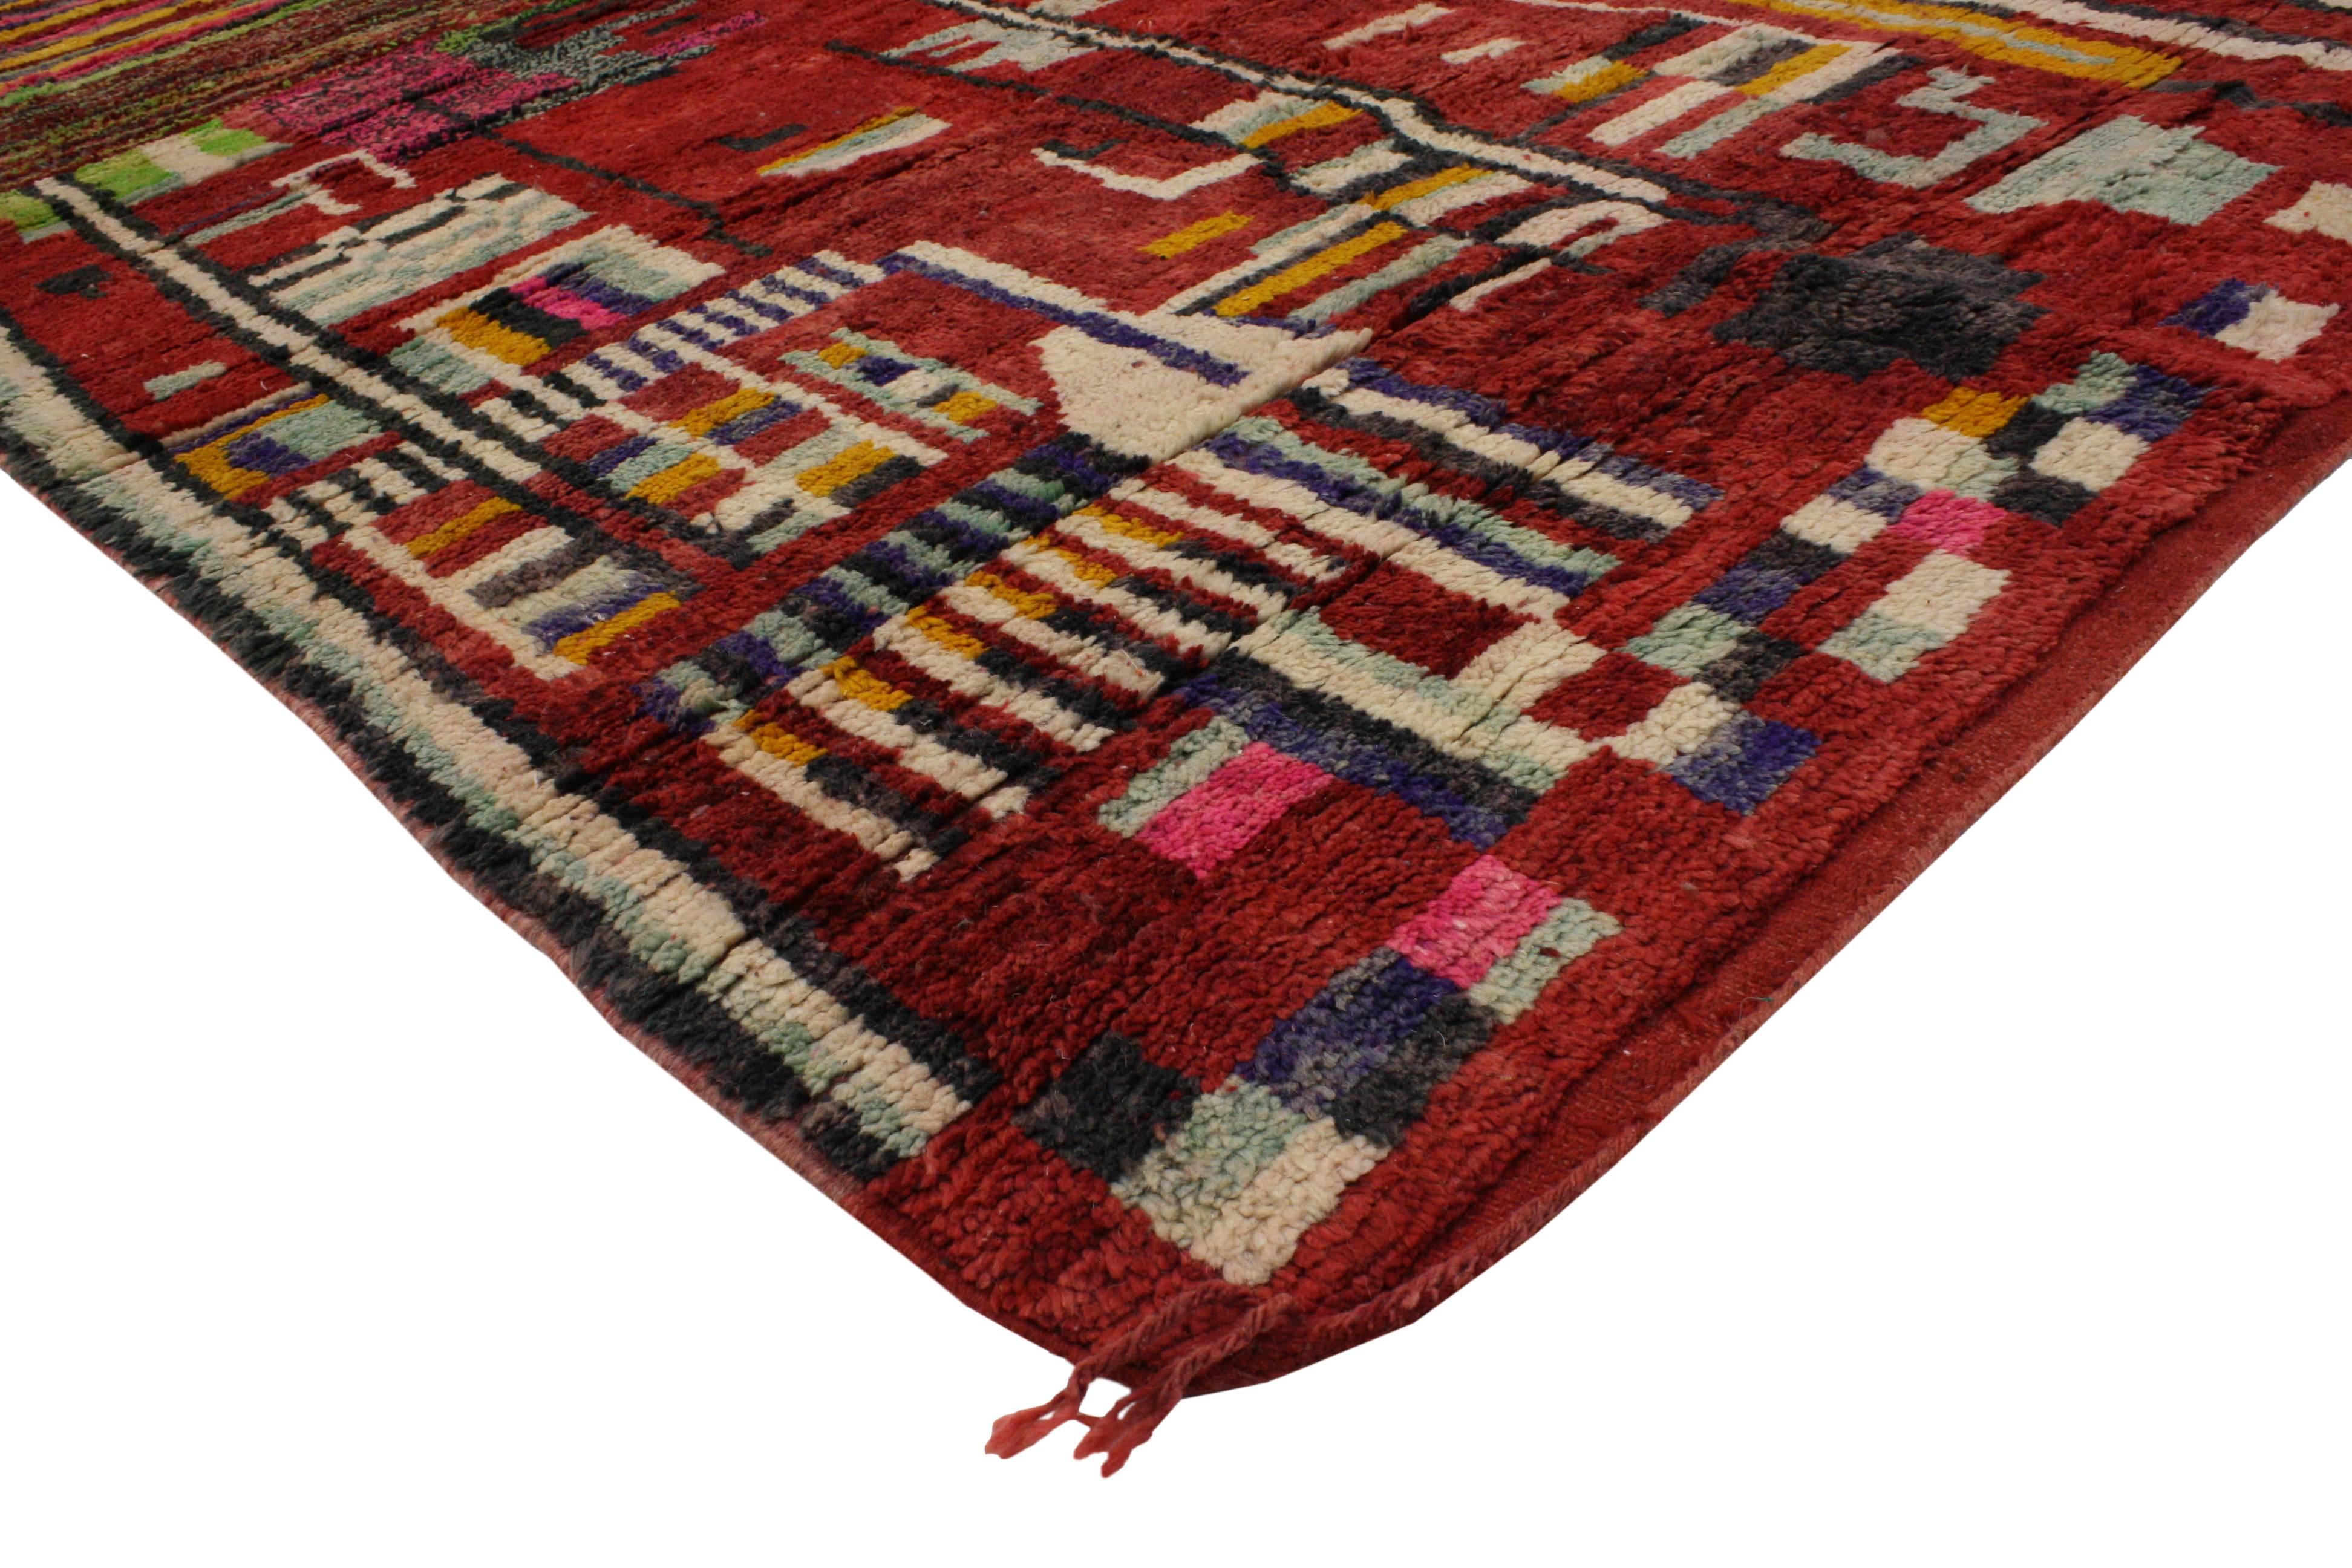 Impeccably woven from hand-knotted wool and free-form designs, this Berber Moroccan rug features a clean design with Mid-Century Modern and Brutalist influence. Showcasing a modern style and saturated red background, this Berber Moroccan rug adds